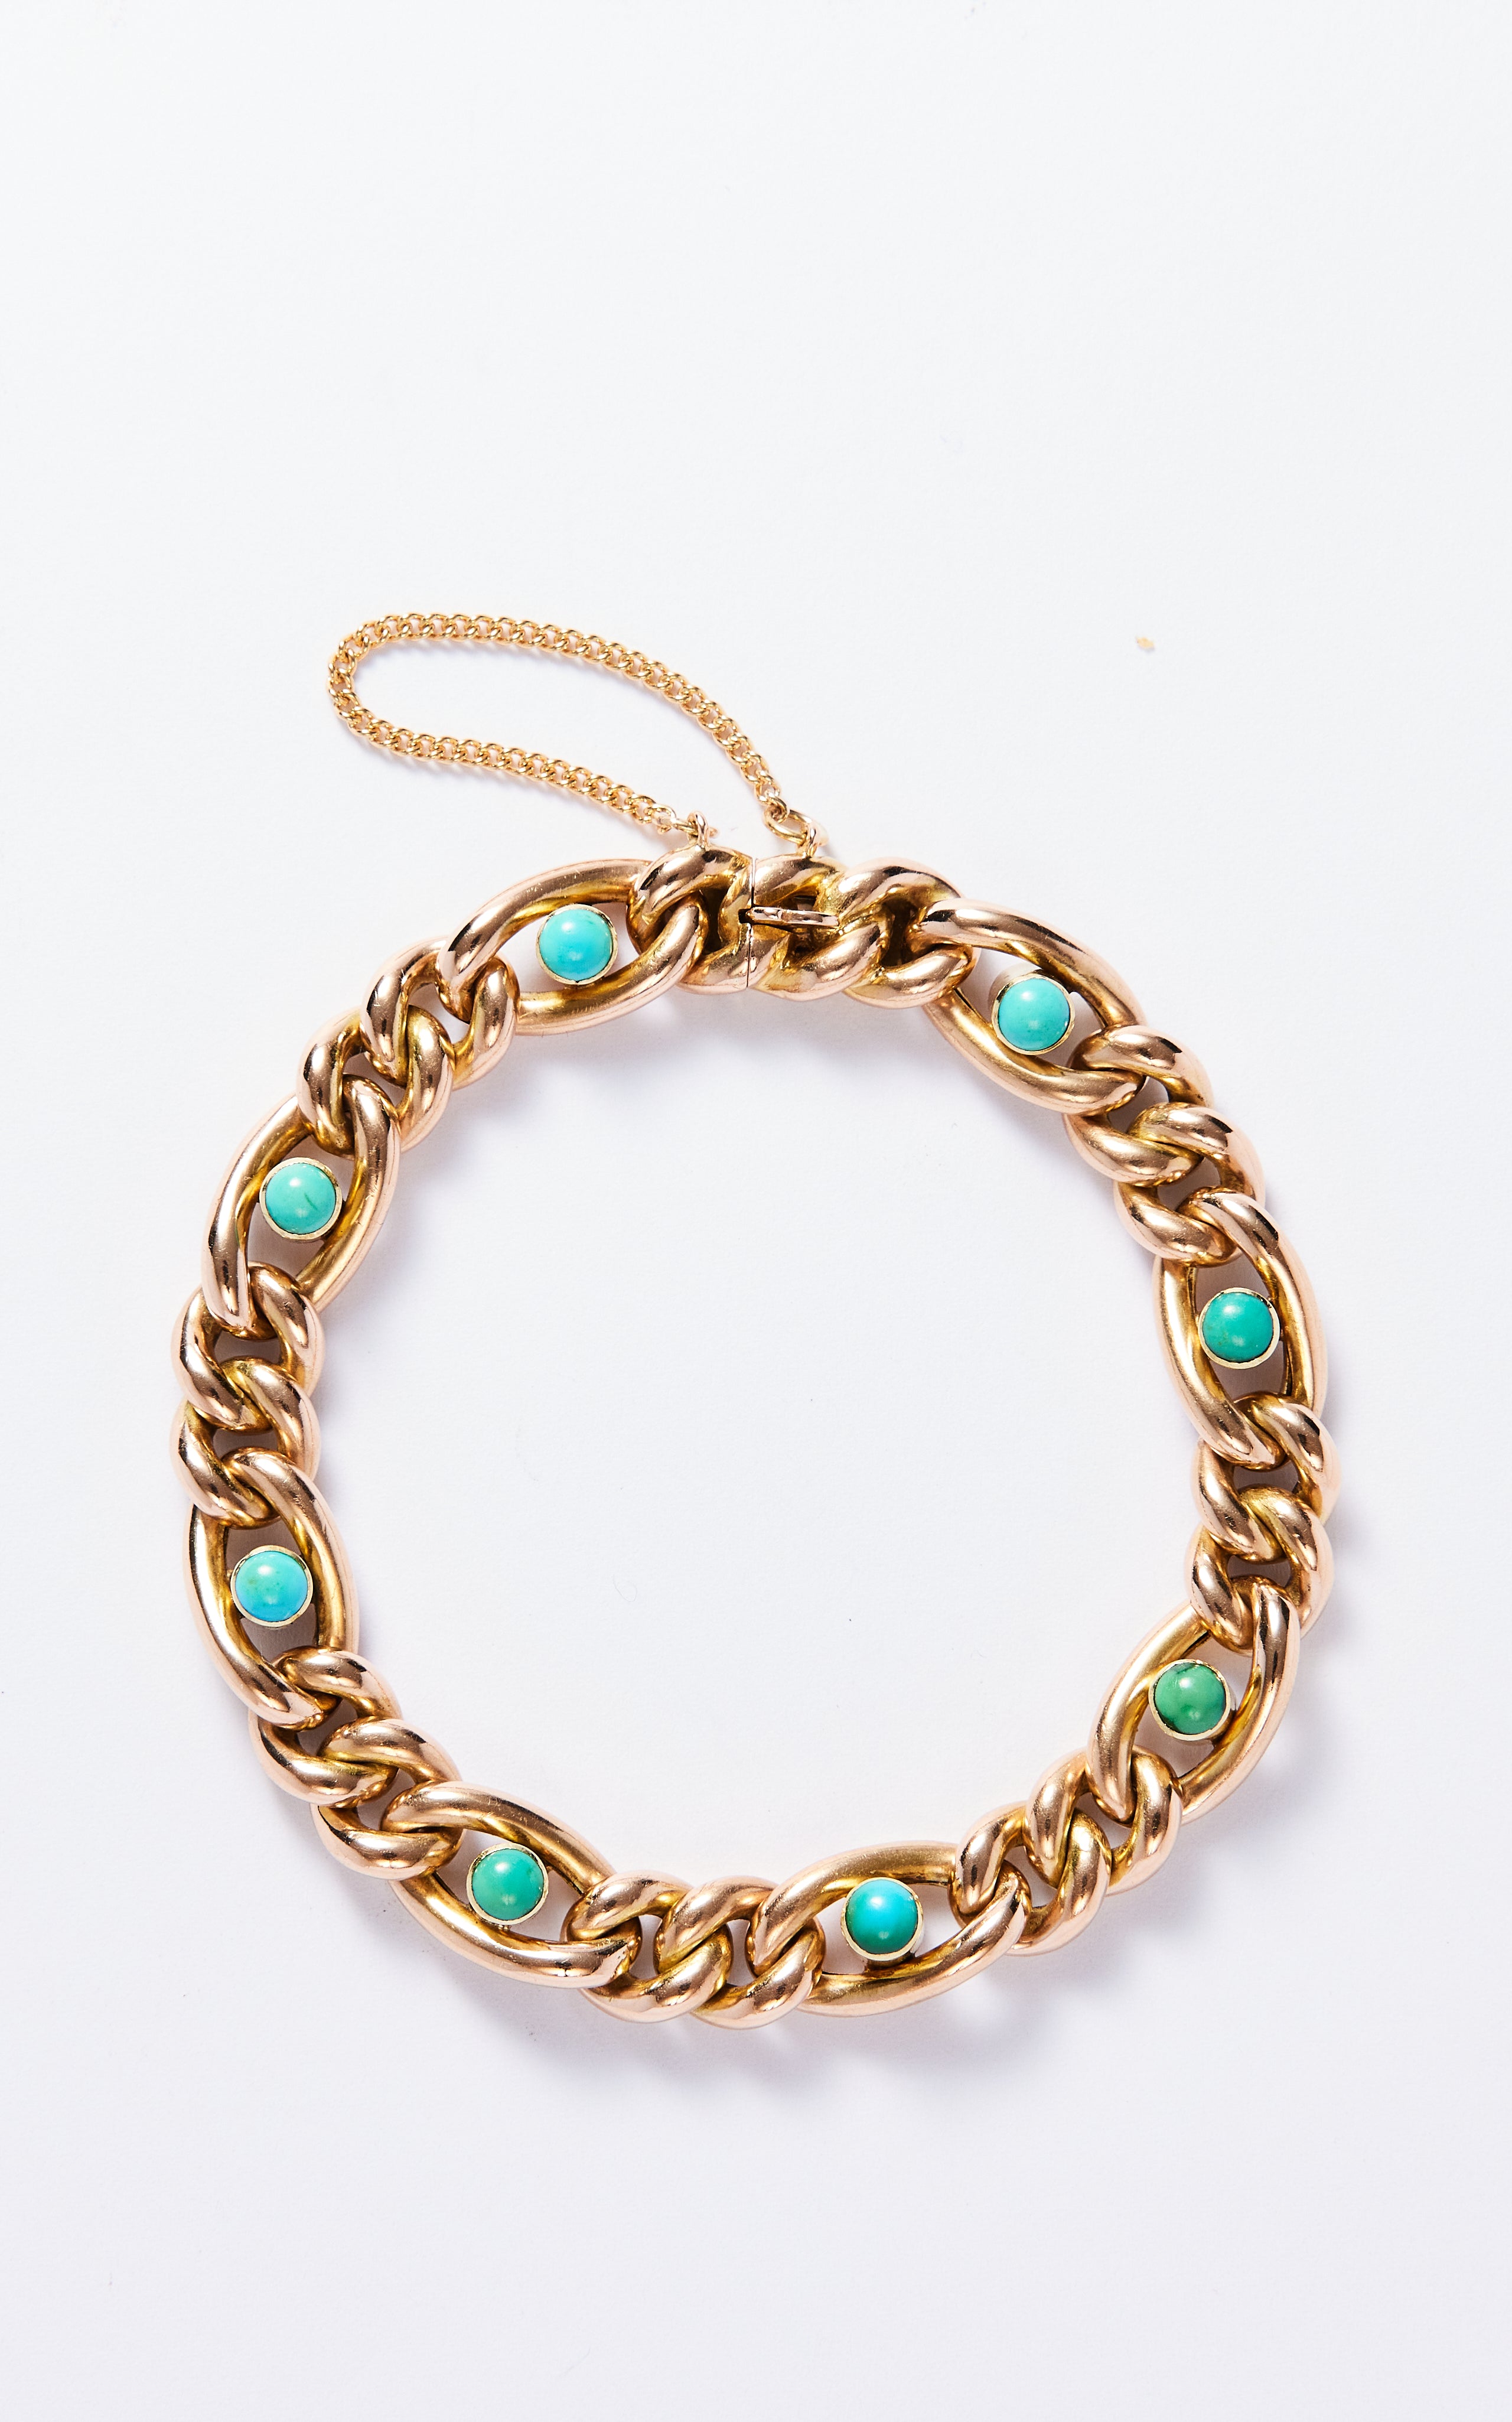 Antique 15ct Curb Bracelet with Turquoise